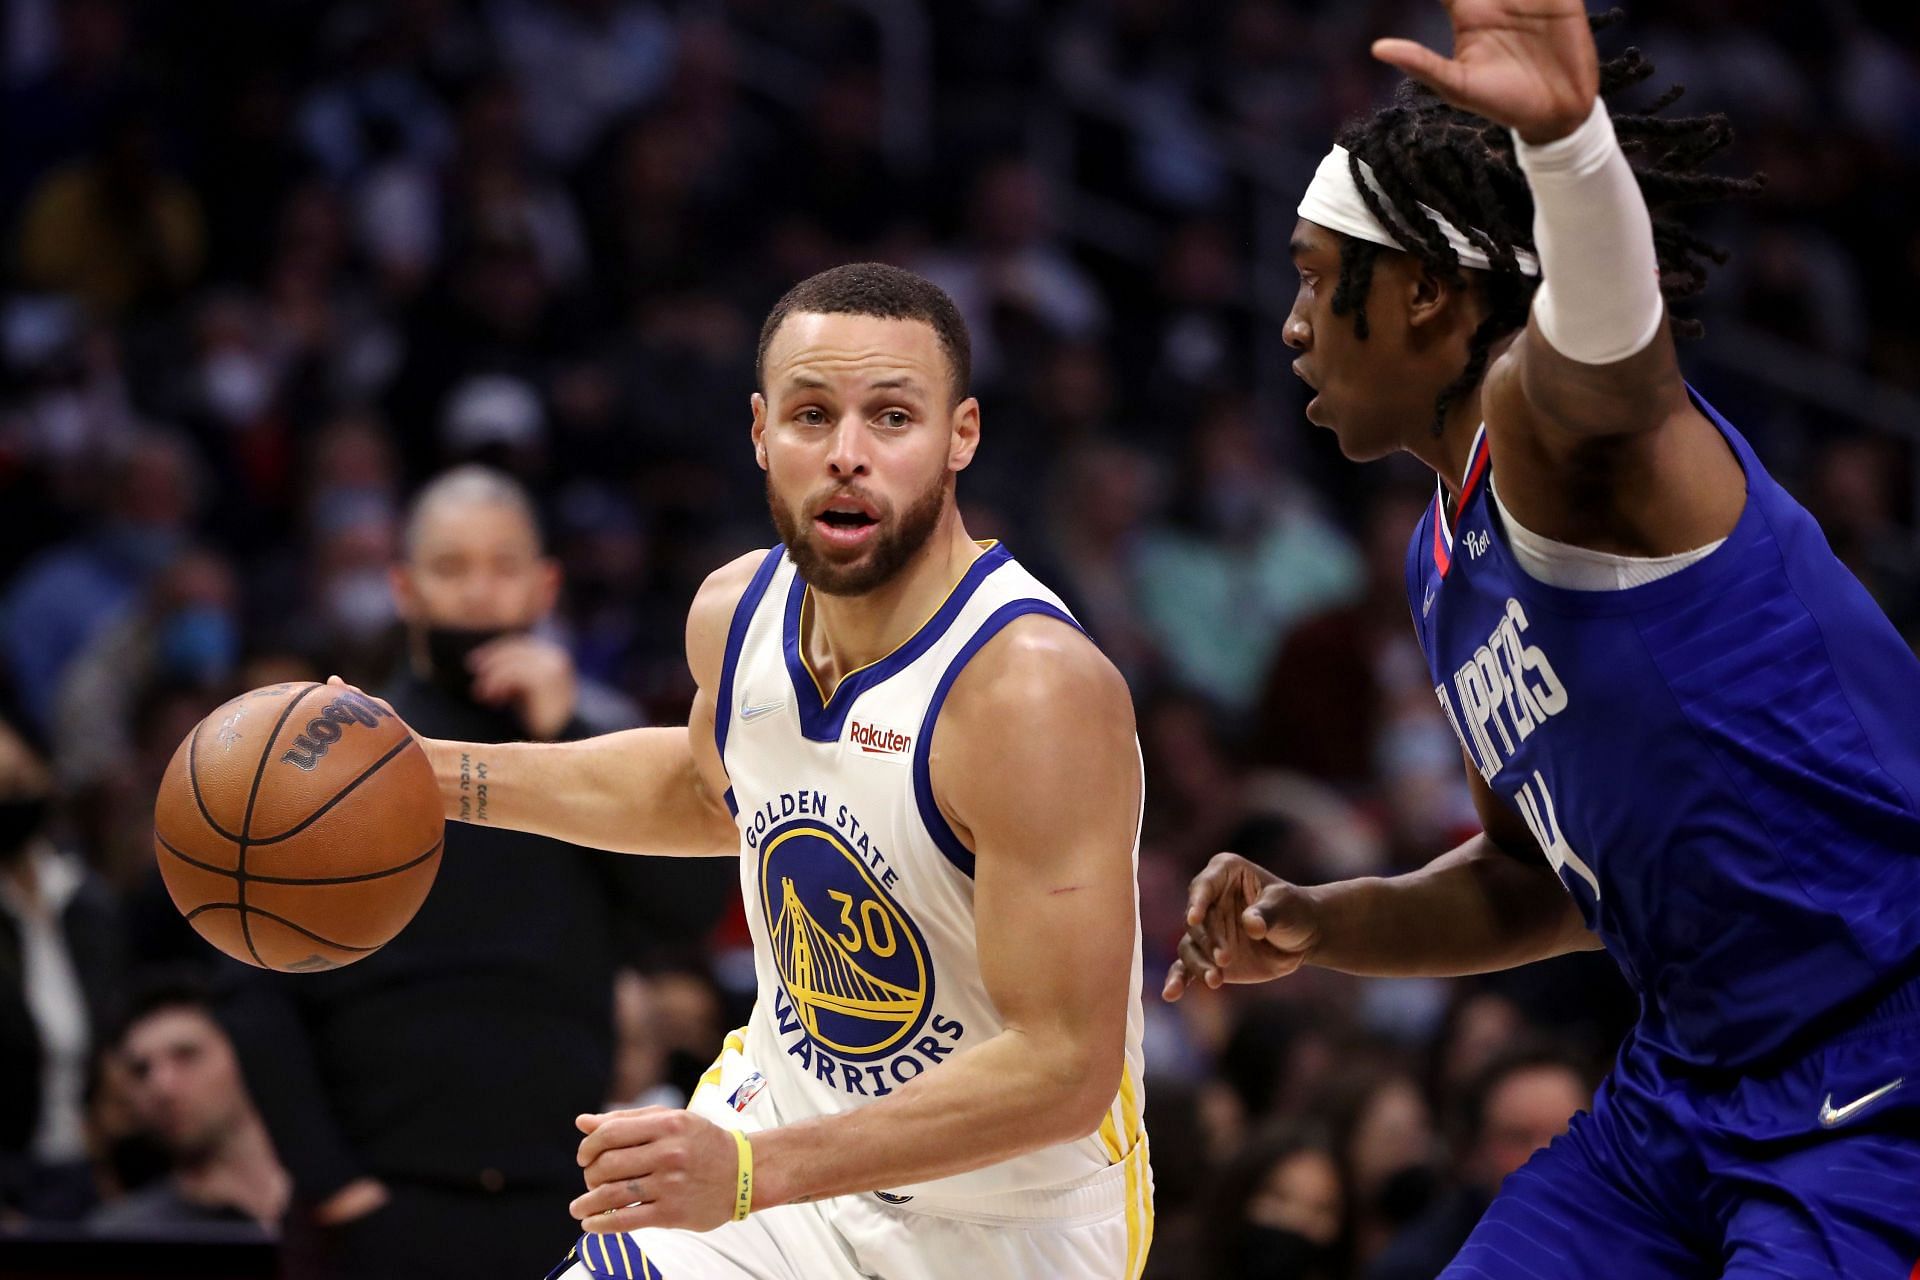 Steph Curry brought up his 17th 30-point game of the season on Monday